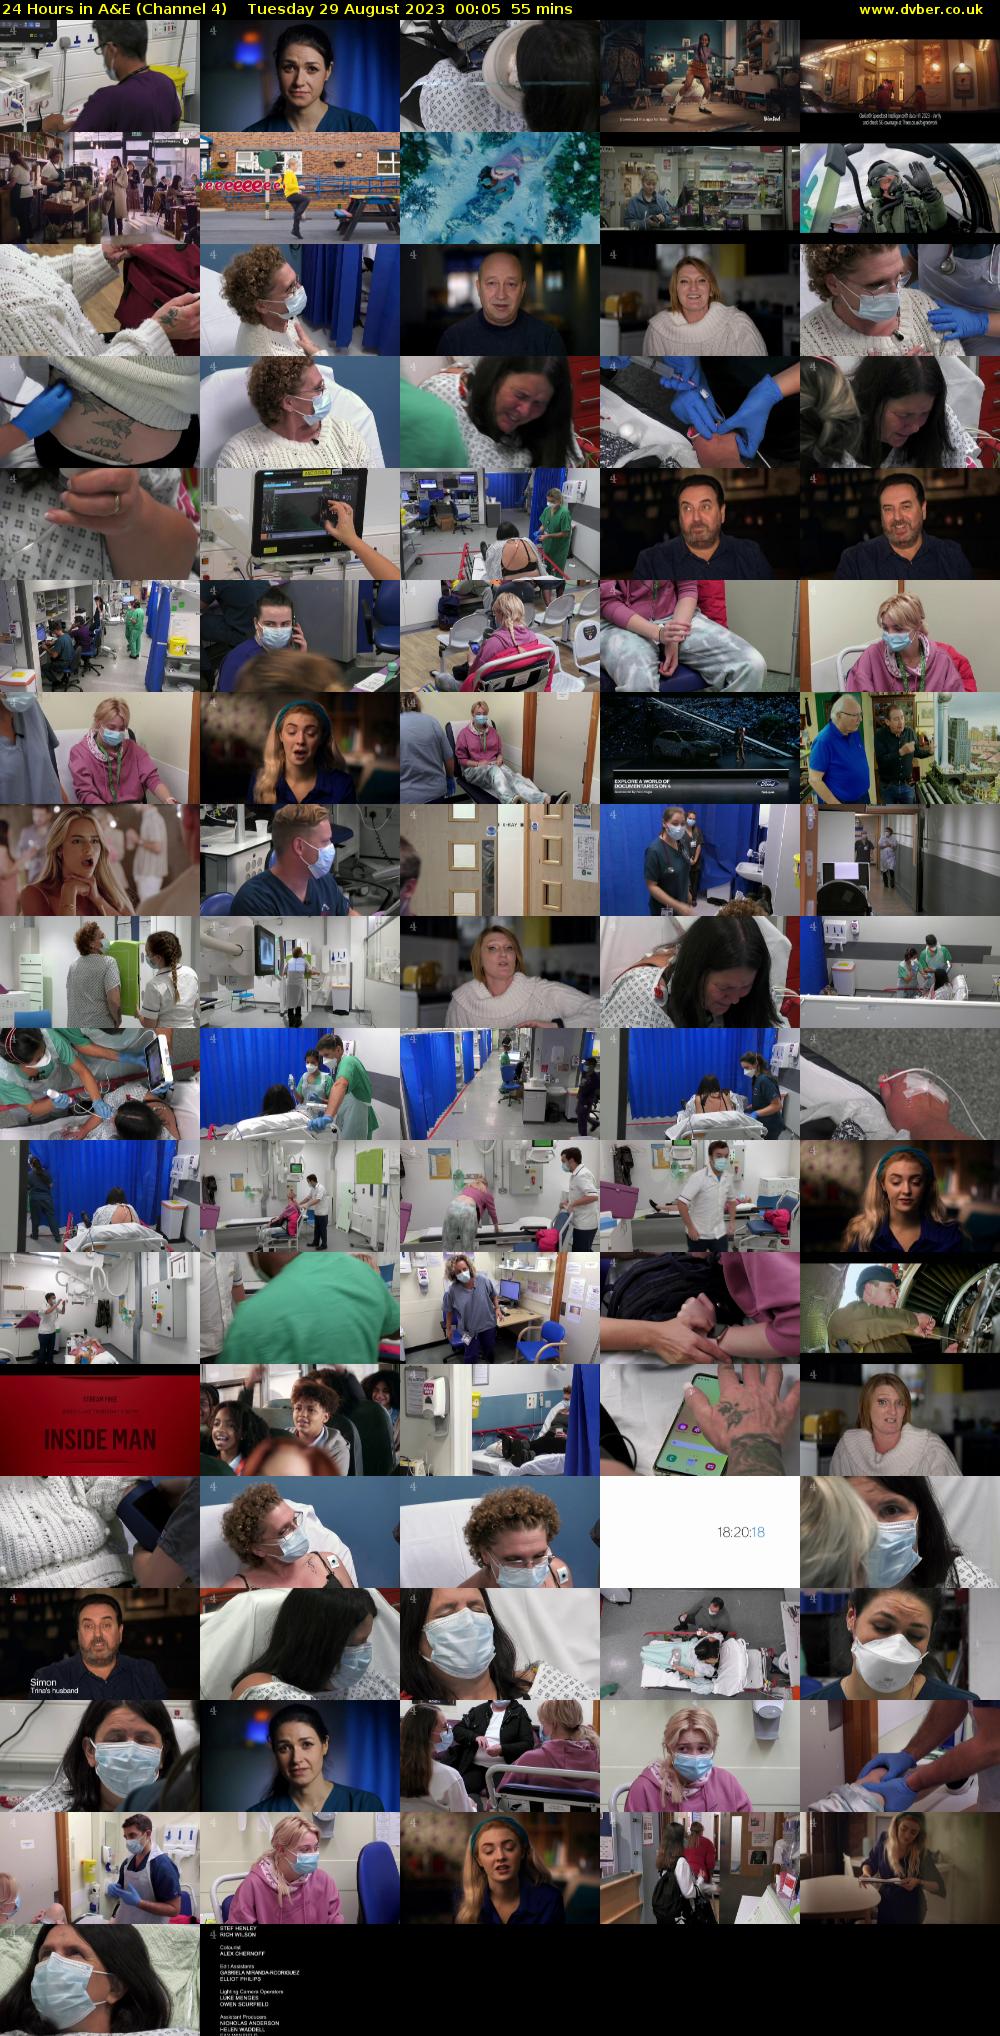 24 Hours in A&E (Channel 4) Tuesday 29 August 2023 00:05 - 01:00